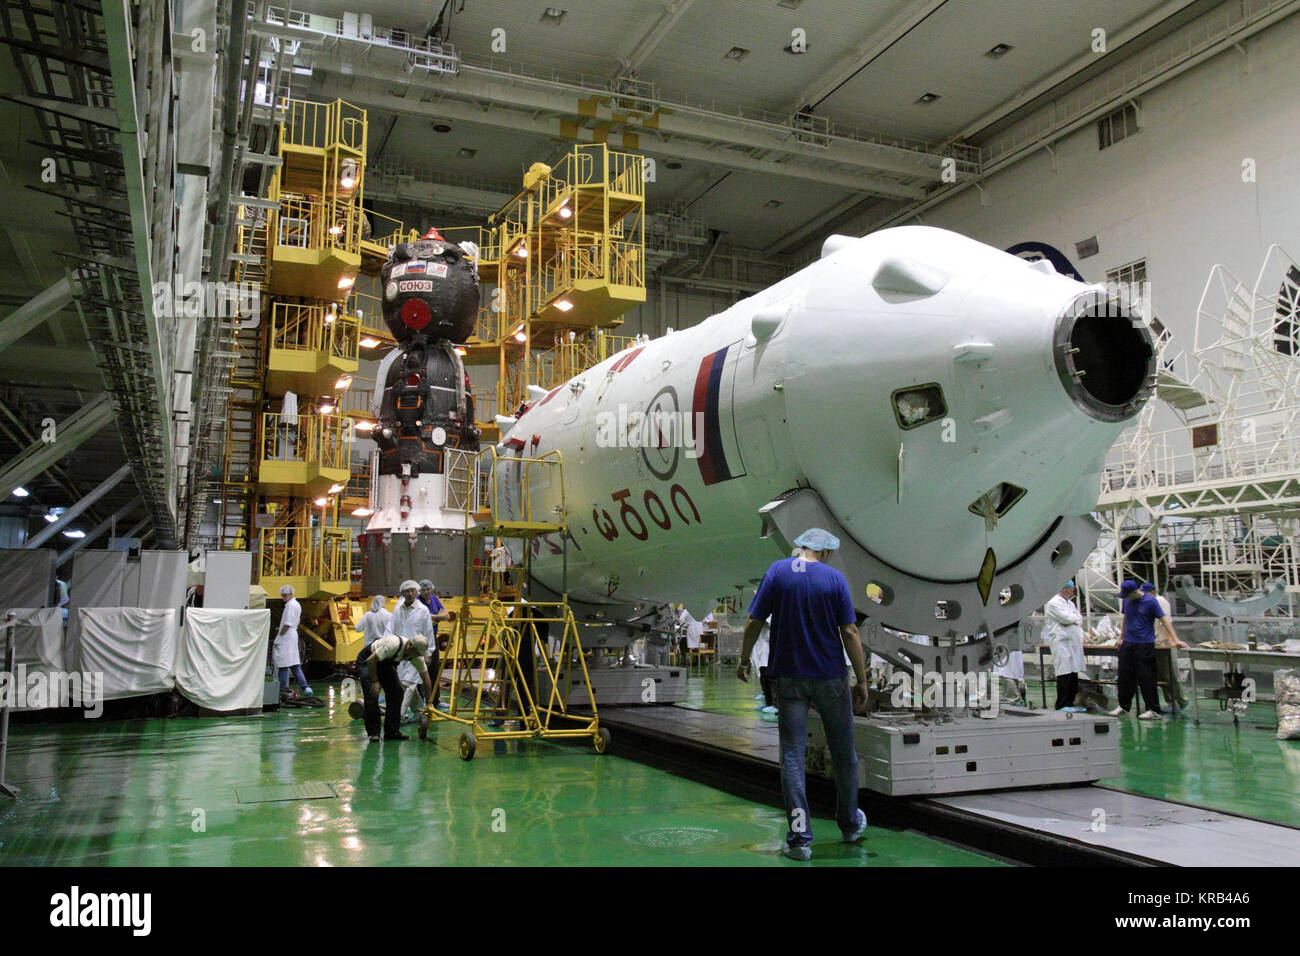 With the upper stage of the Soyuz booster in the foreground and the Soyuz TMA-05M spacecraft in the background, technicians at the Baikonur Cosmodrome in Kazakhstan prepared to encapsulate the Soyuz vehicle into its booster July 8, 2012, setting the stage for the launch of Expedition 32/33 Soyuz Commander Yuri Malenchenko, NASA Flight Engineer Sunita Williams and Flight Aki Hoshide of the Japan Exploration and Space Agency July 15 to the International Space Station for a four-month mission.  NASA/Victor Zelentsov Soyuz TMA-05M spacecraft integration facility 1 Stock Photo